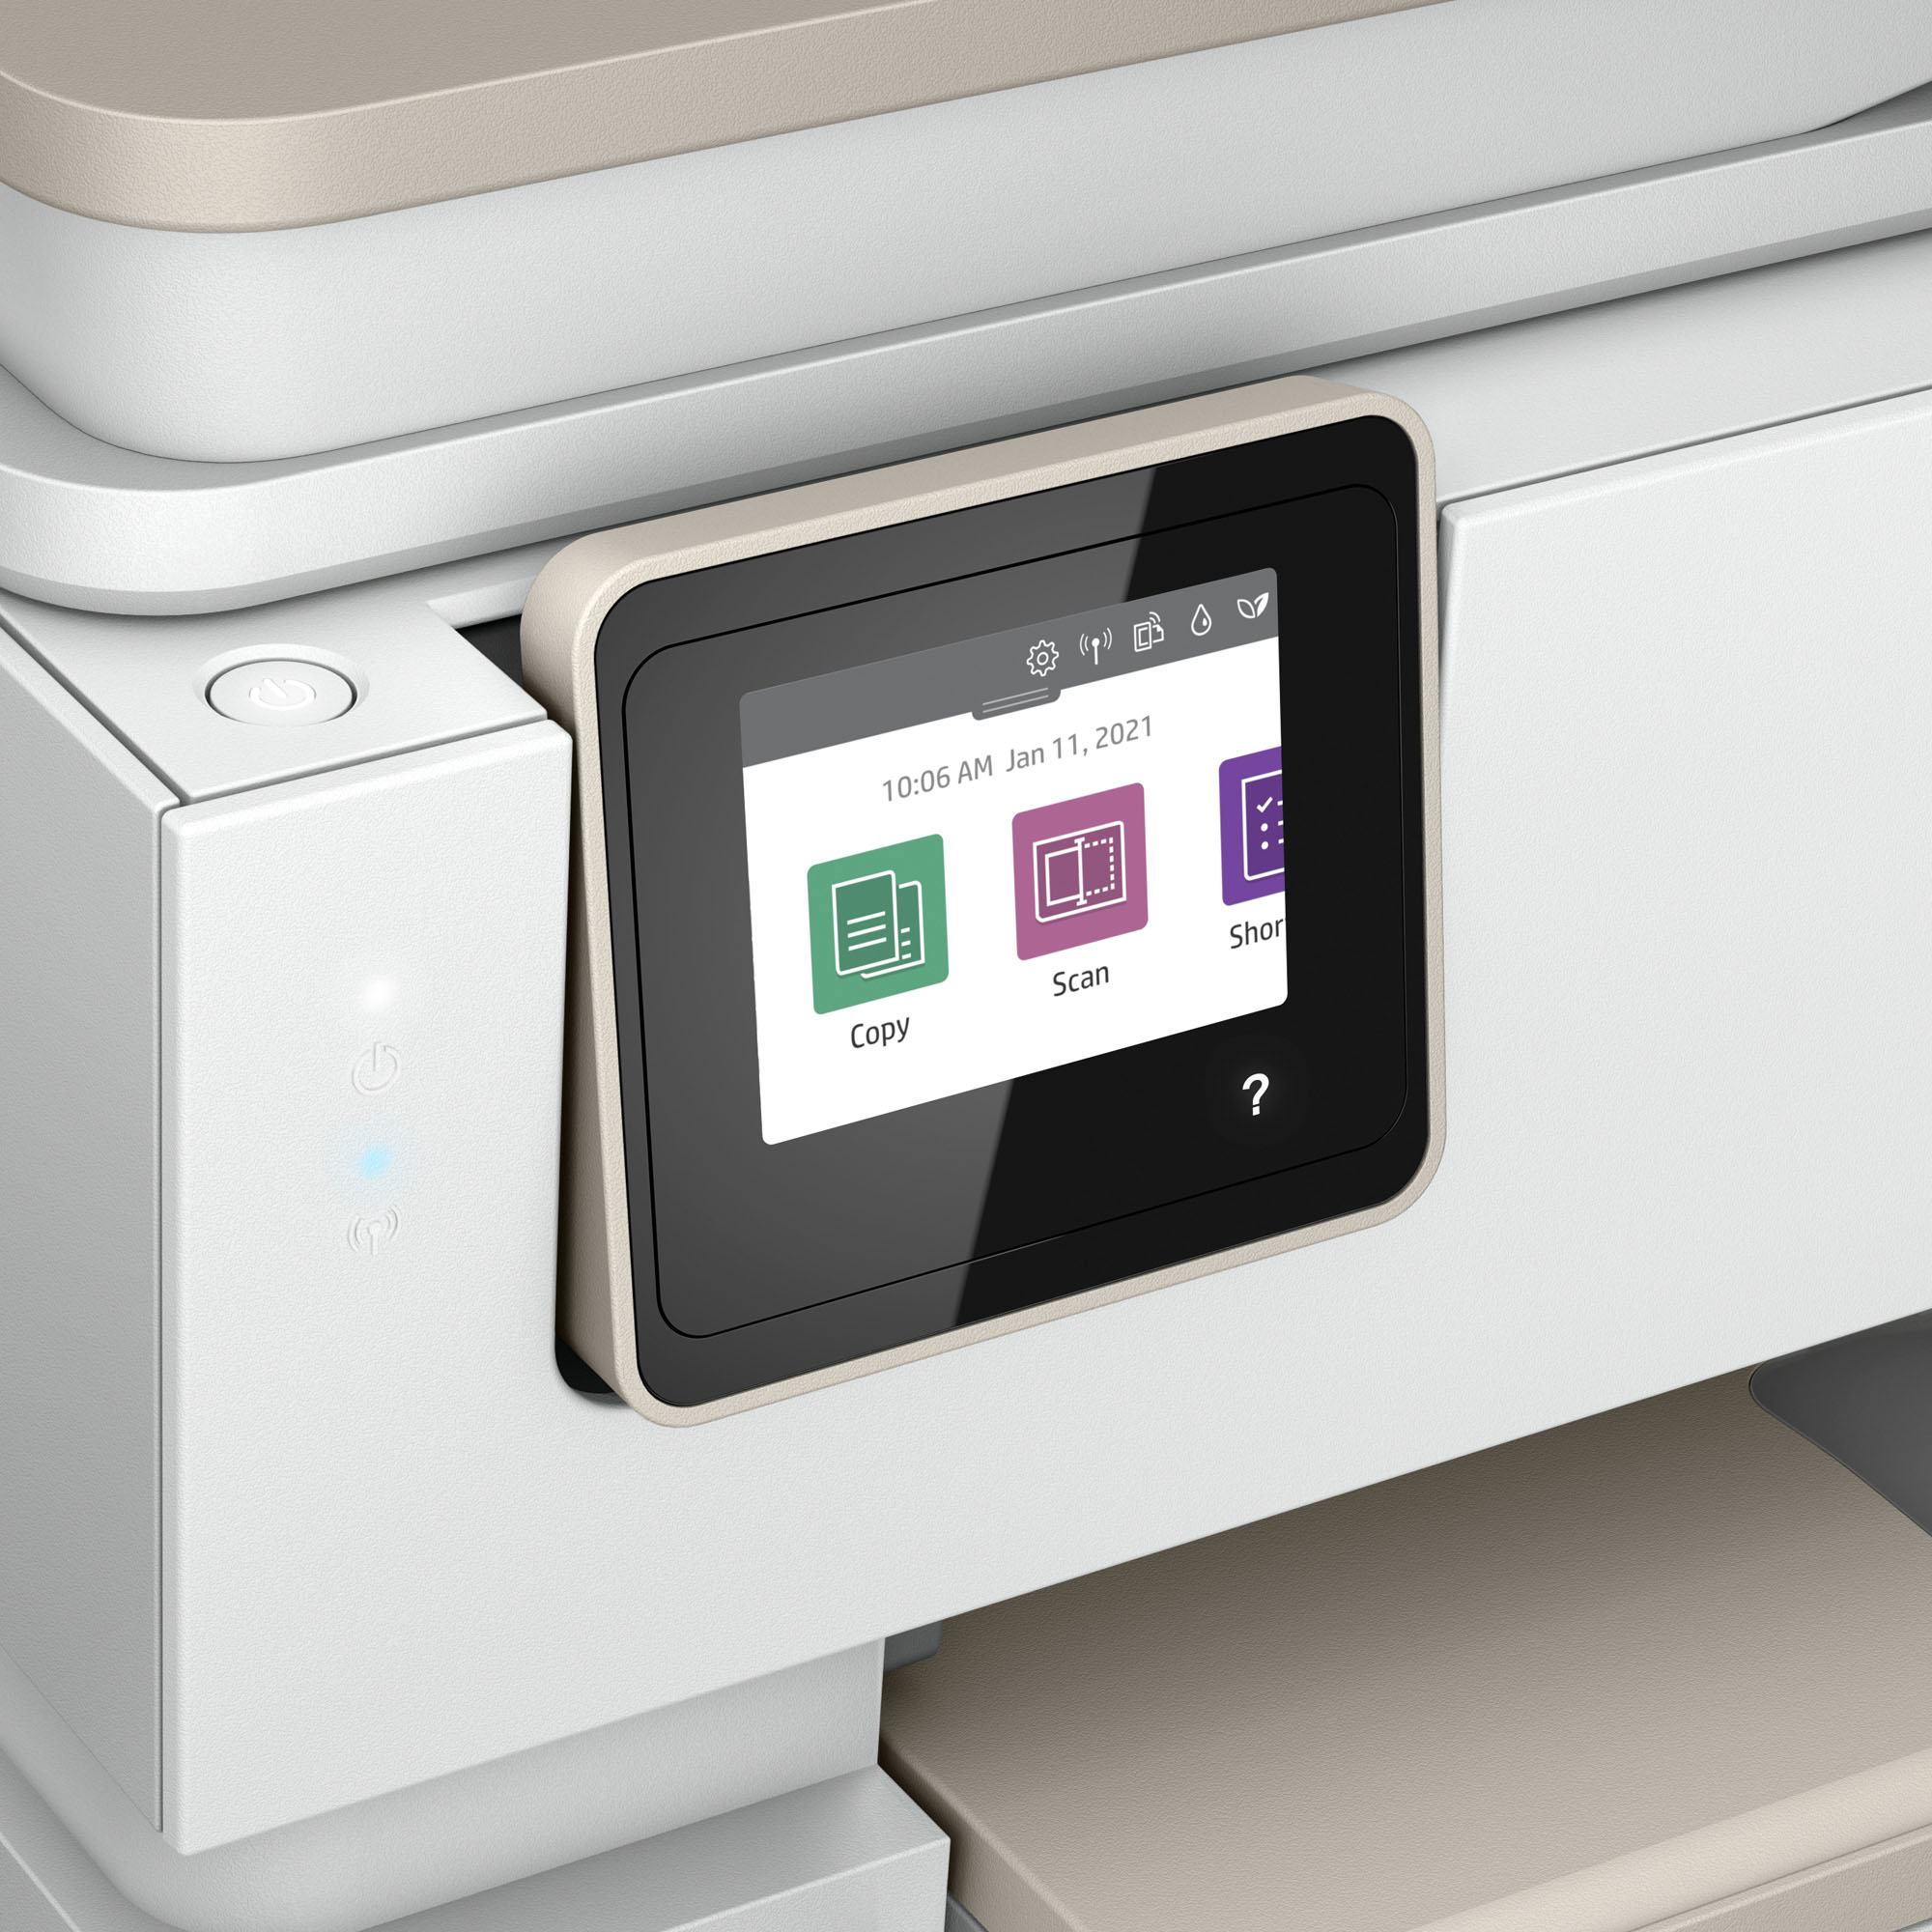 HP Envy Inspire 7955e: A Printer That Meets Your Home Printing Needs -  Forbes Vetted